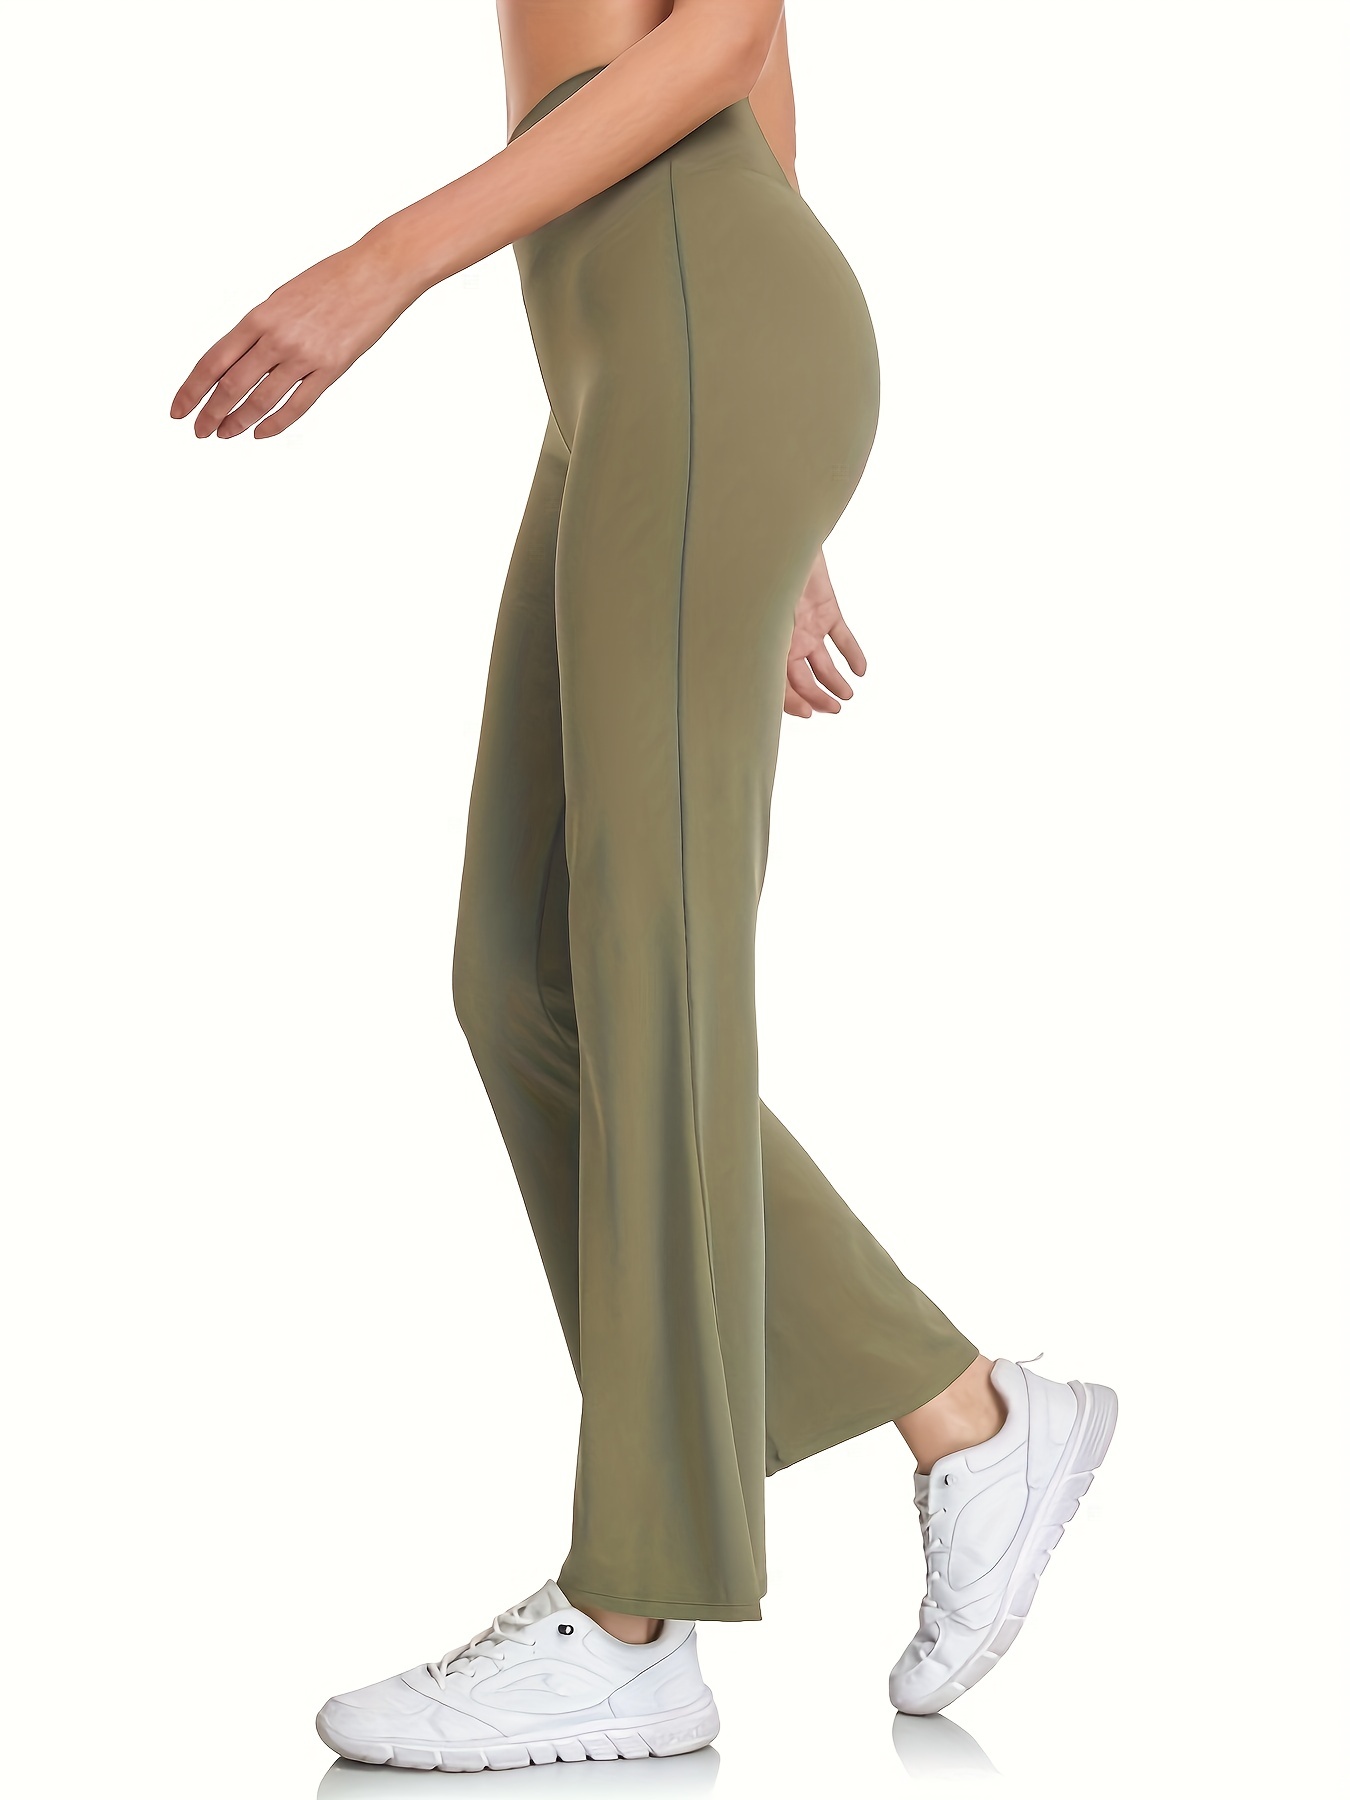  High Waisted Yoga Pants for Women Wide Leg Stretchy